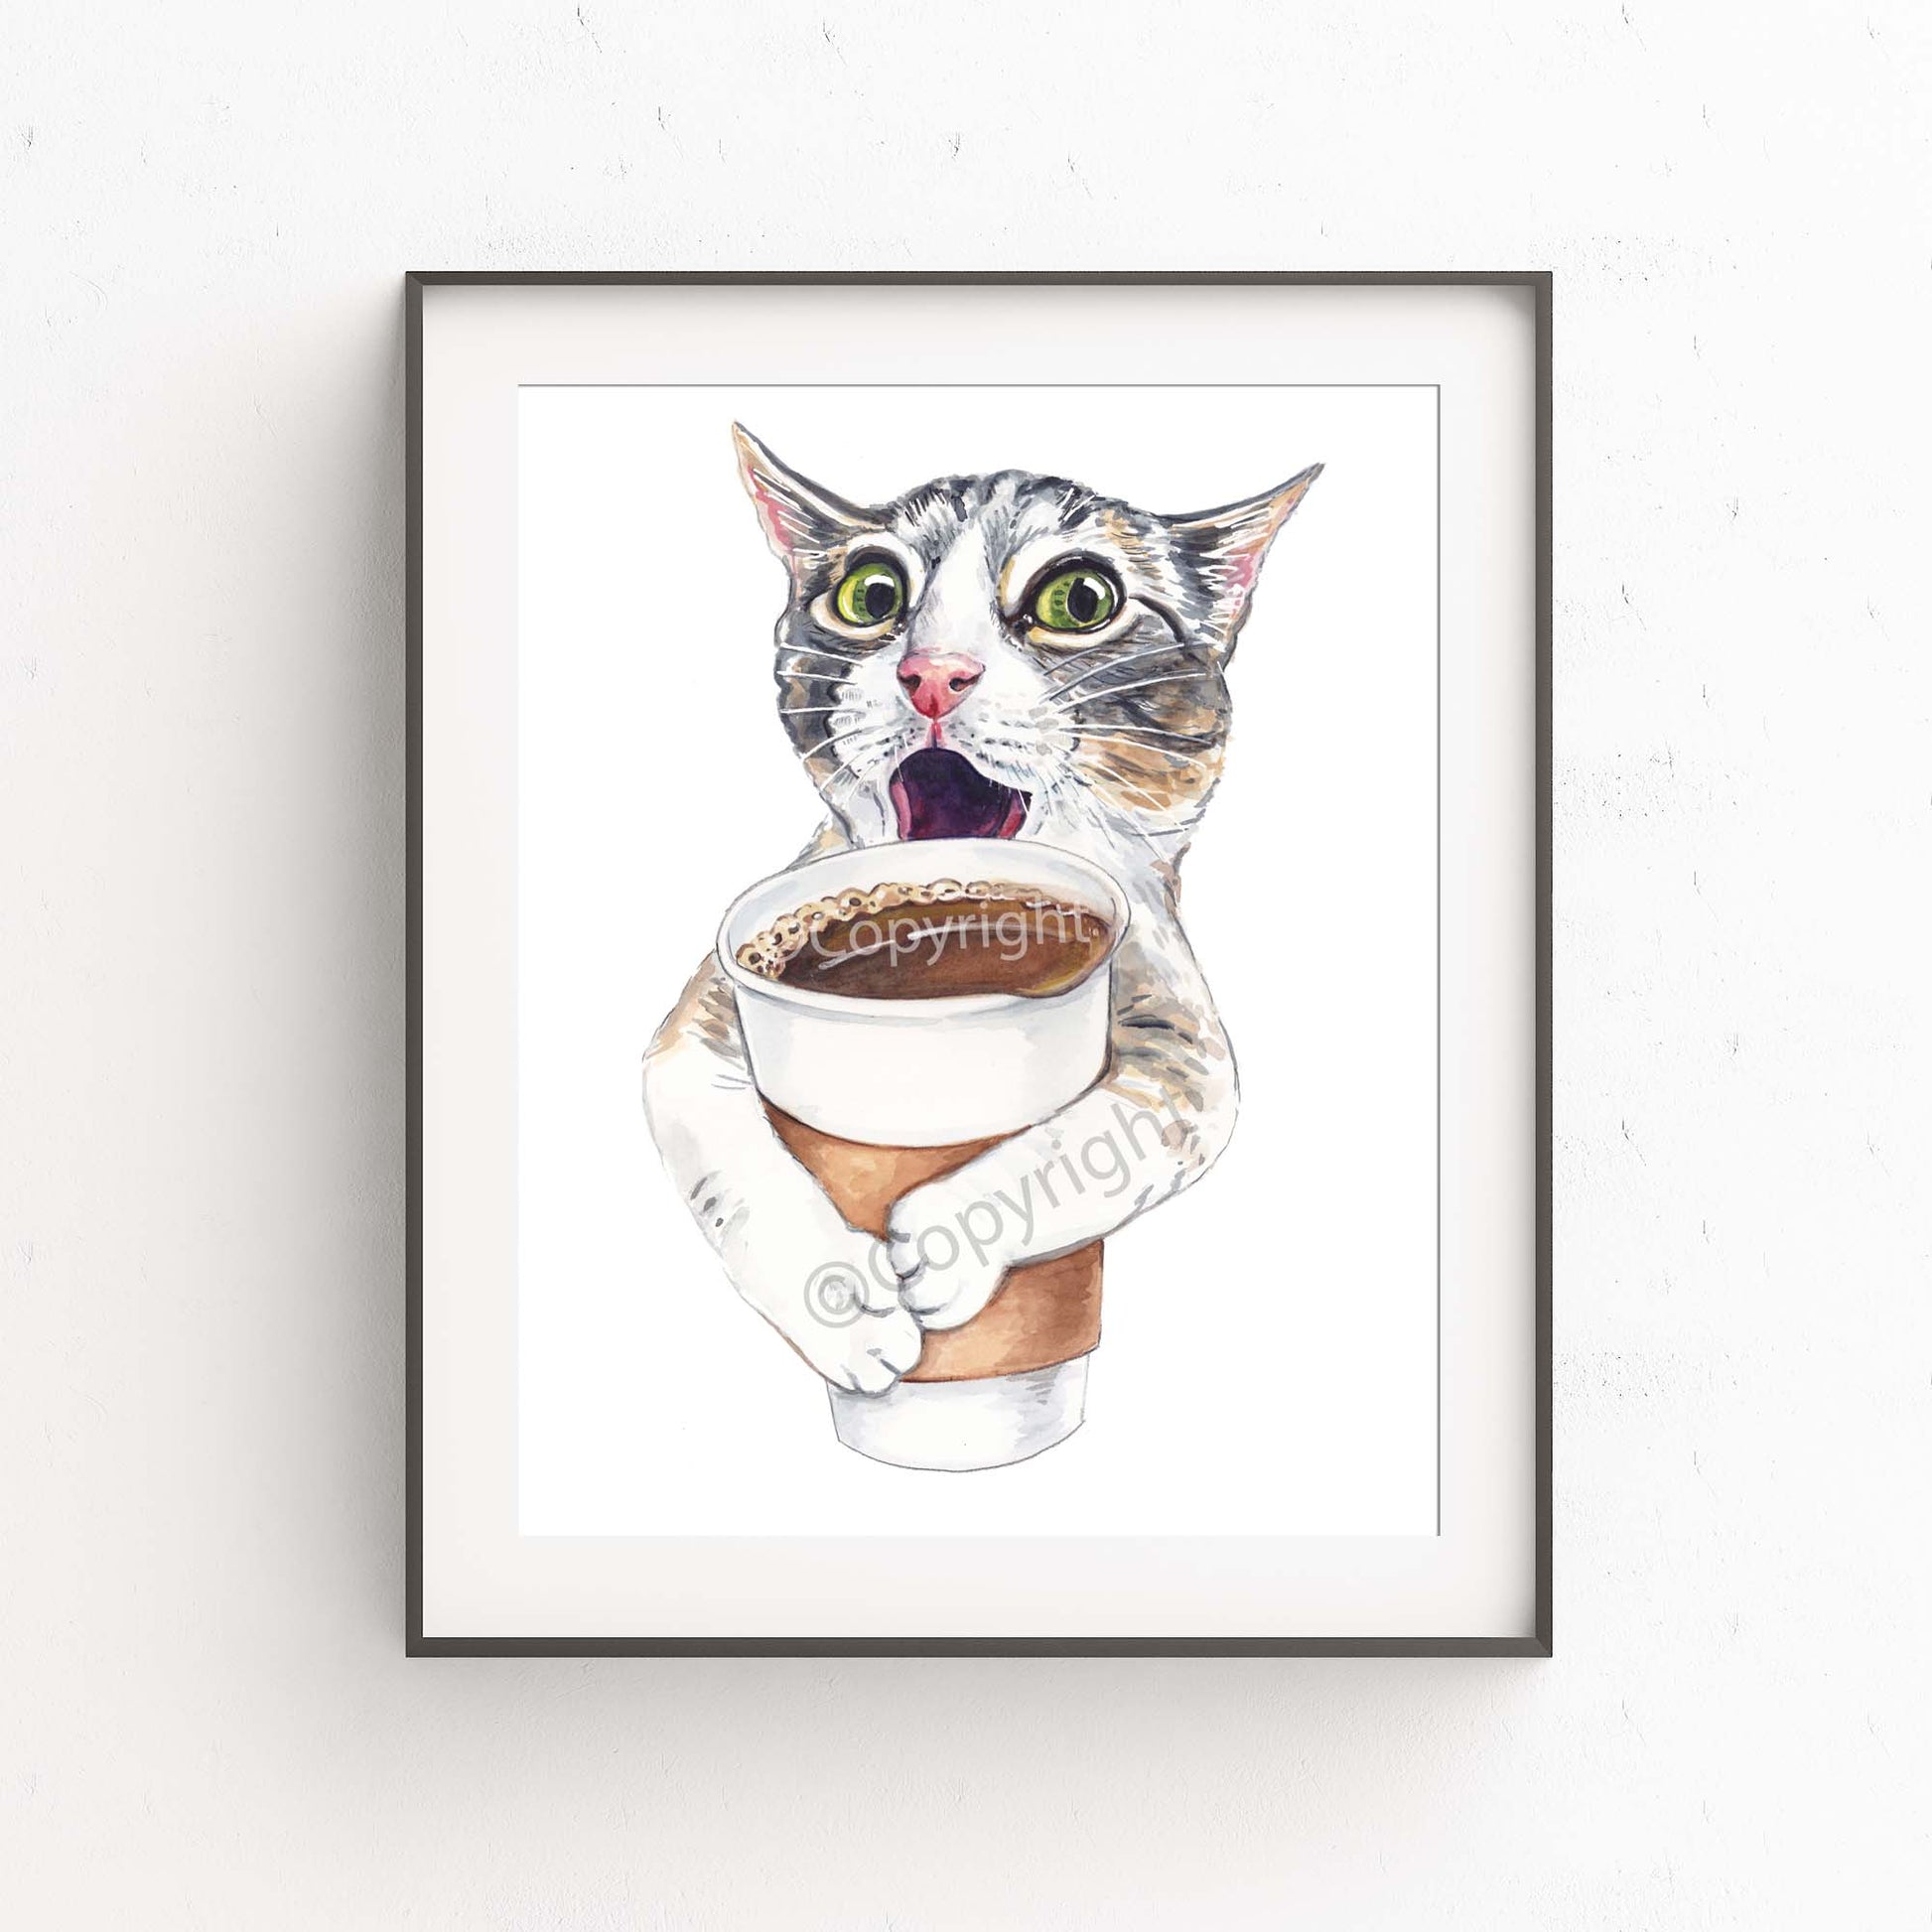 Watercolour painting of an excited tabby cat holding a large cup of coffee. Art by Deidre Wicks